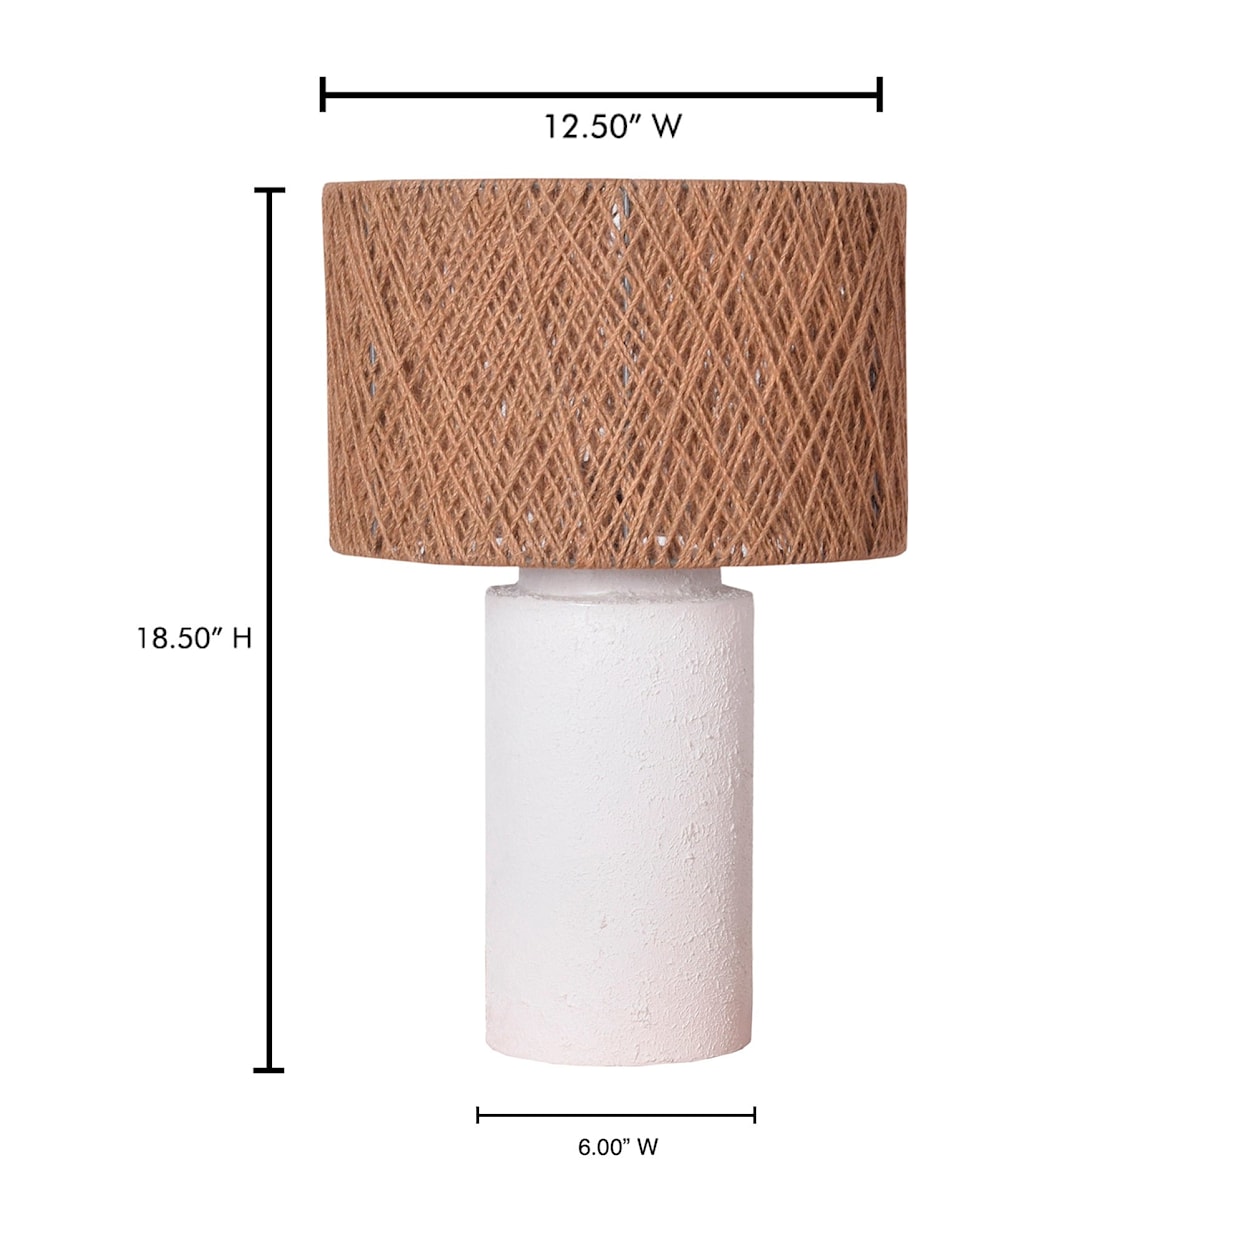 Moe's Home Collection Aine Table Lamp